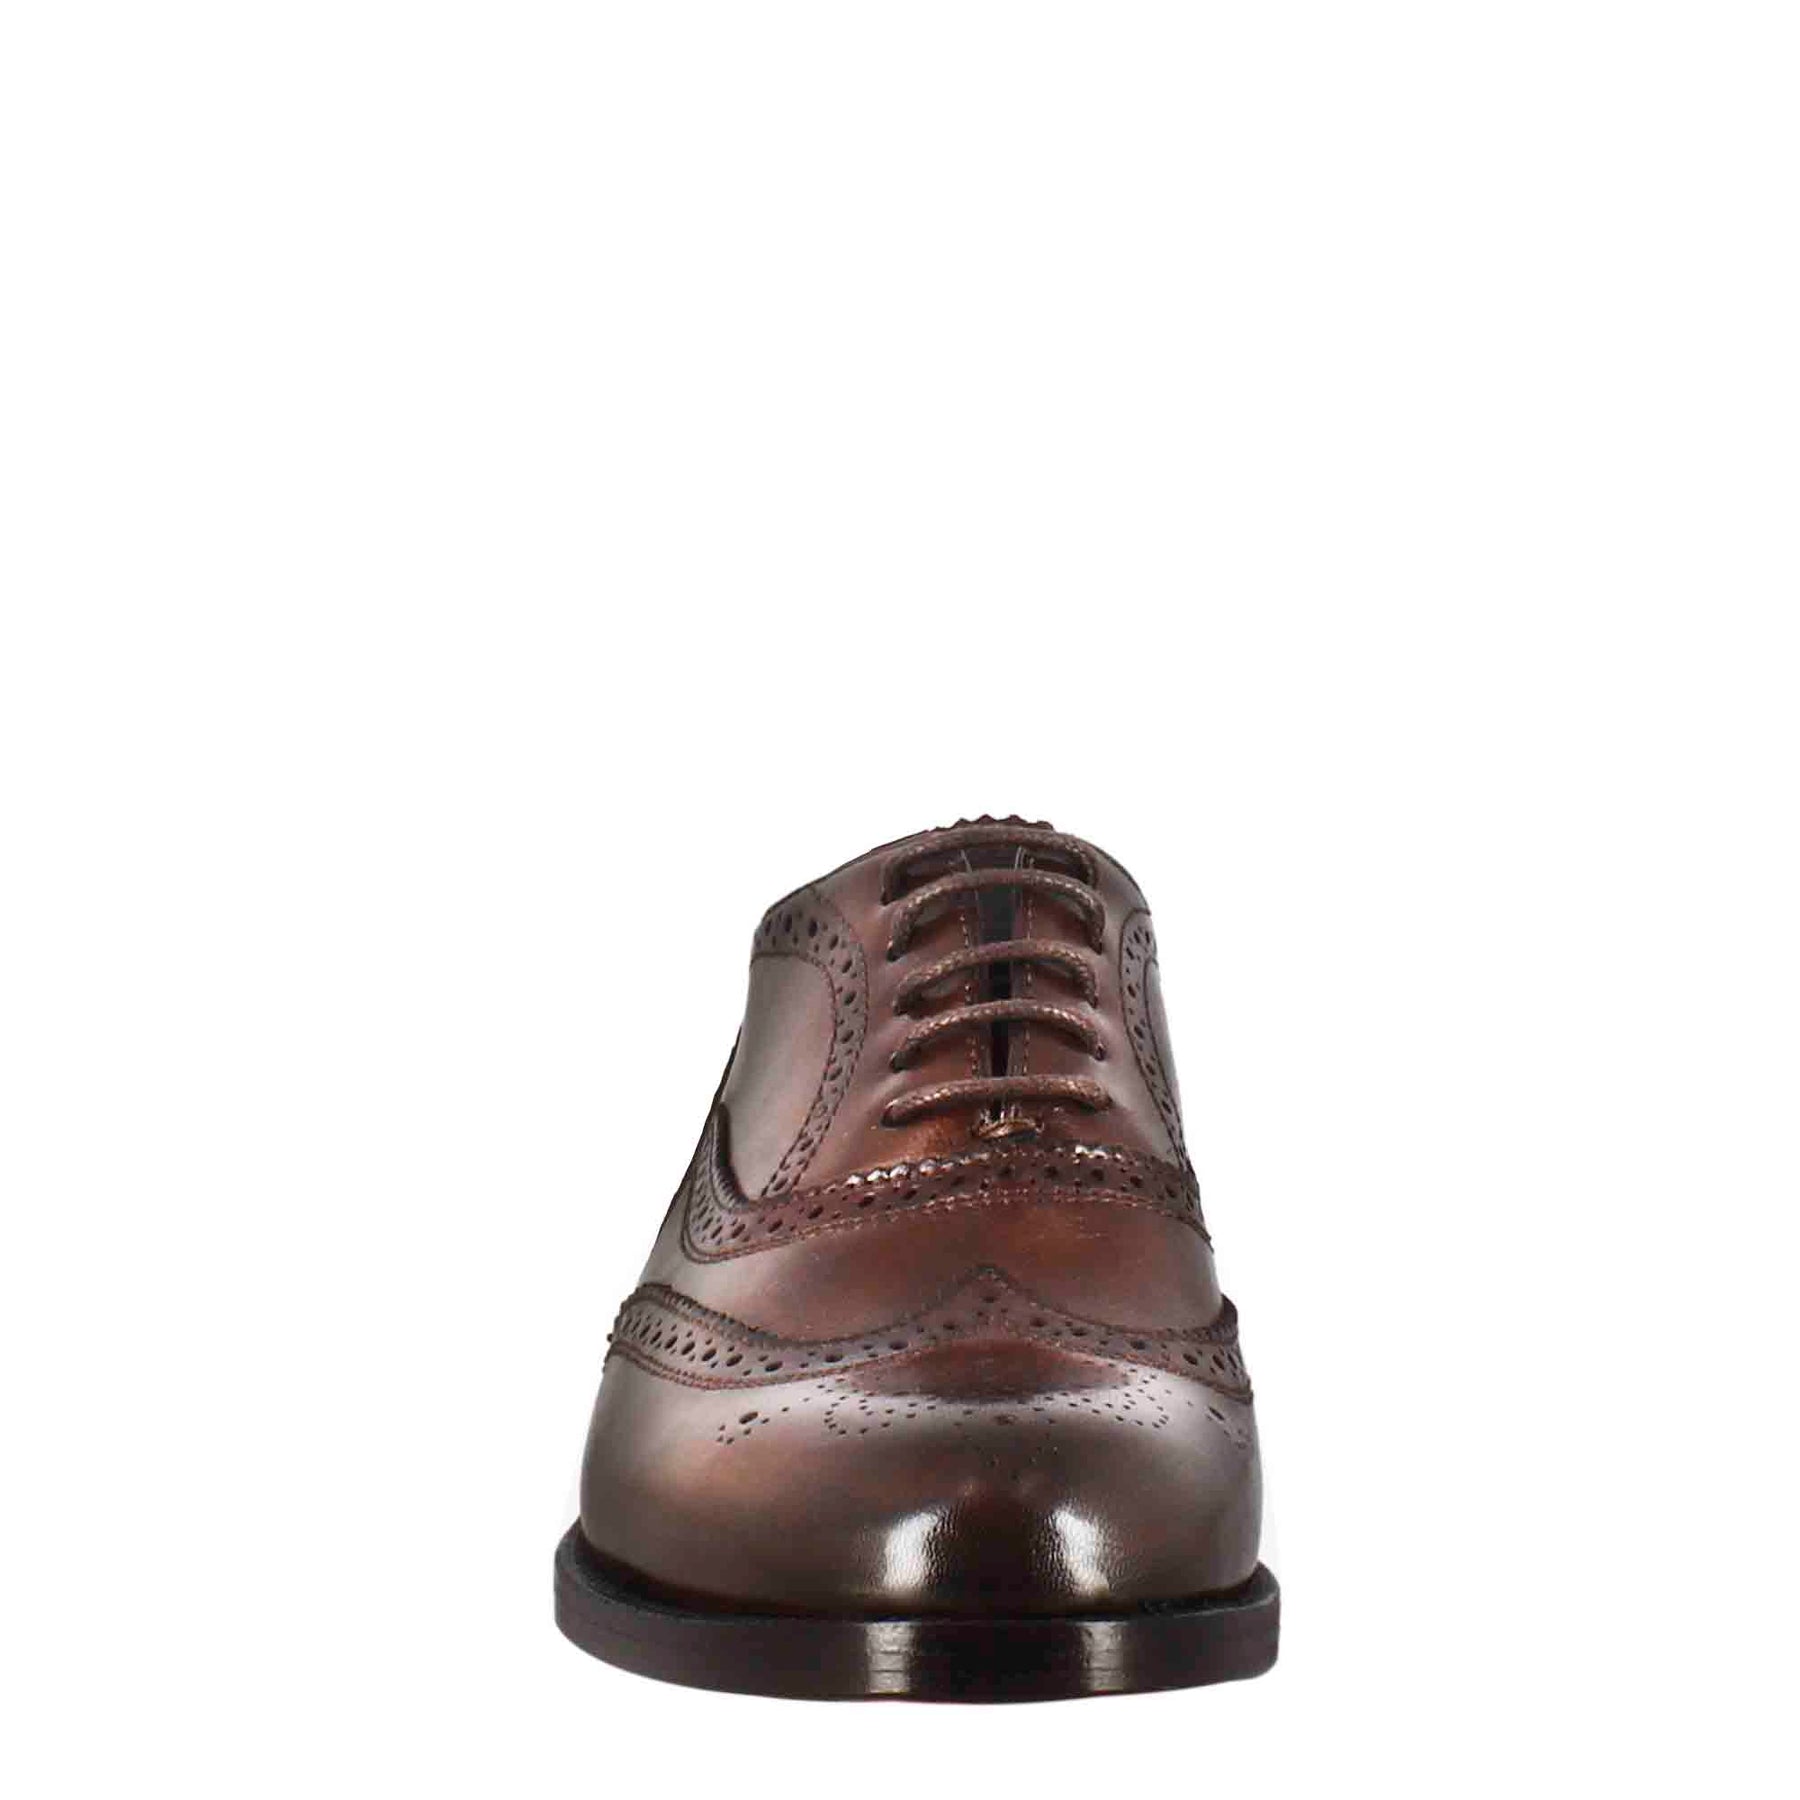 Brogue women's oxfords in dark and light brown leather